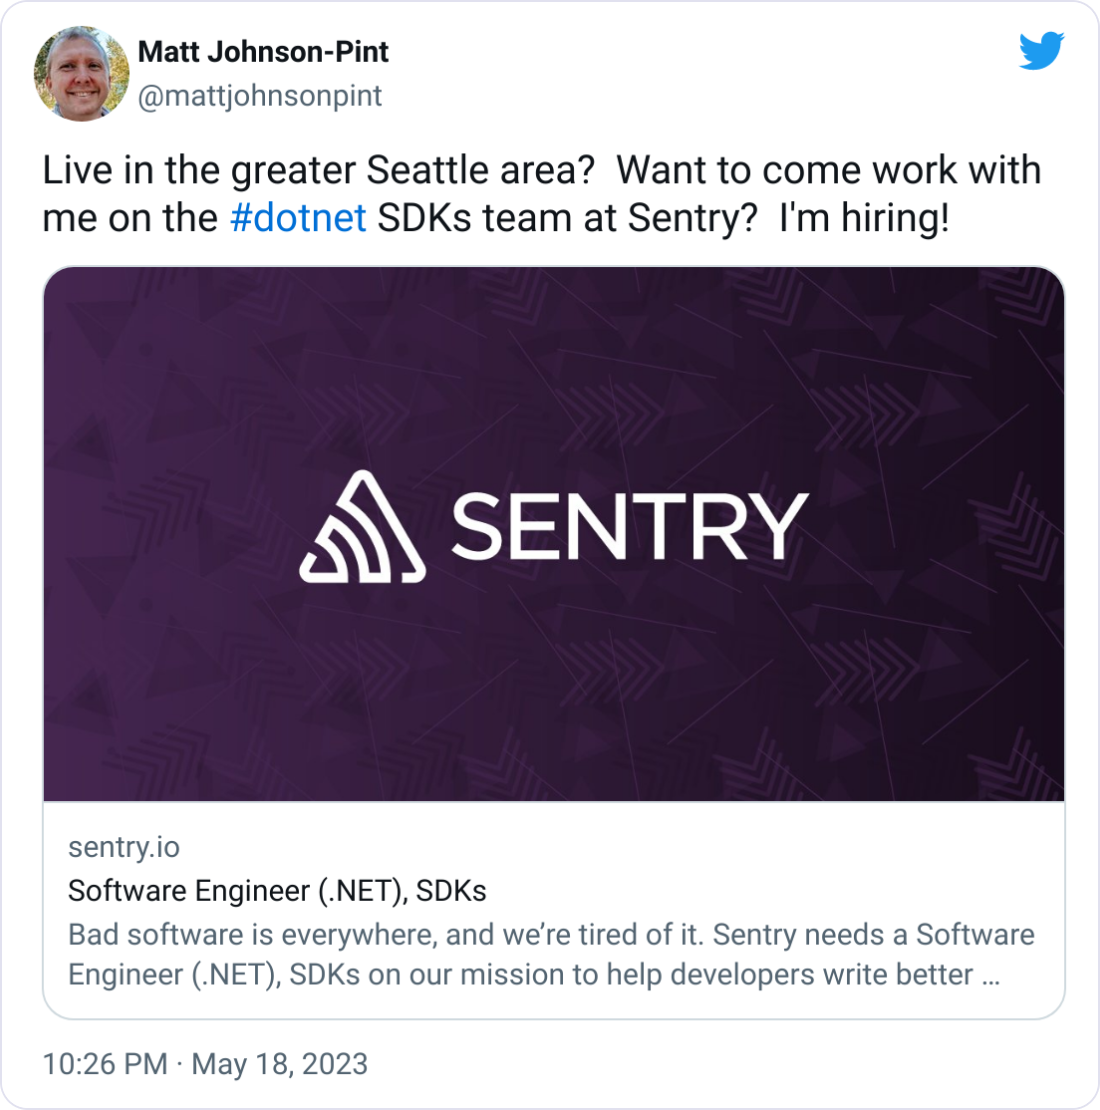 Matt Johnson-Pint @mattjohnsonpint Live in the greater Seattle area?  Want to come work with me on the #dotnet SDKs team at Sentry?  I'm hiring!